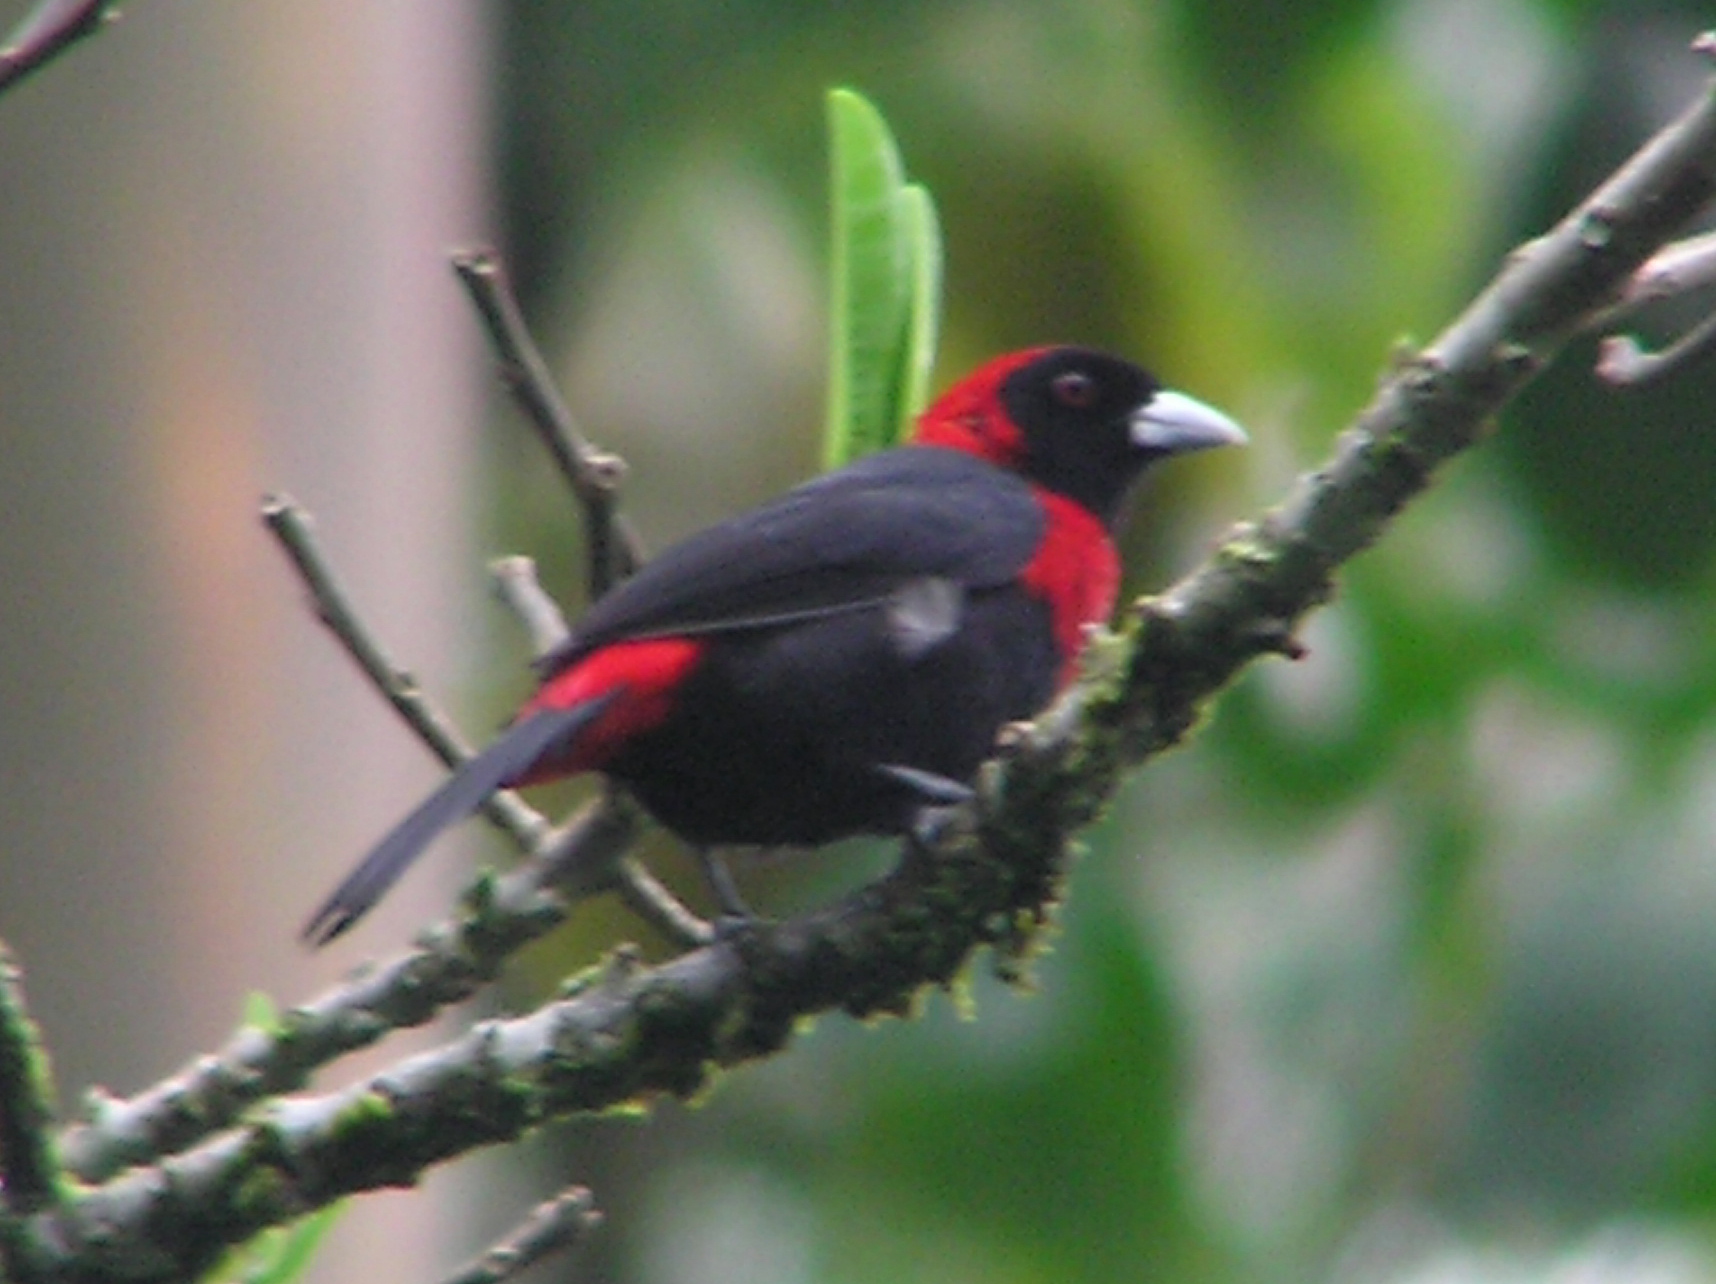 Click picture to see more Crimson-collared Tanager photos.